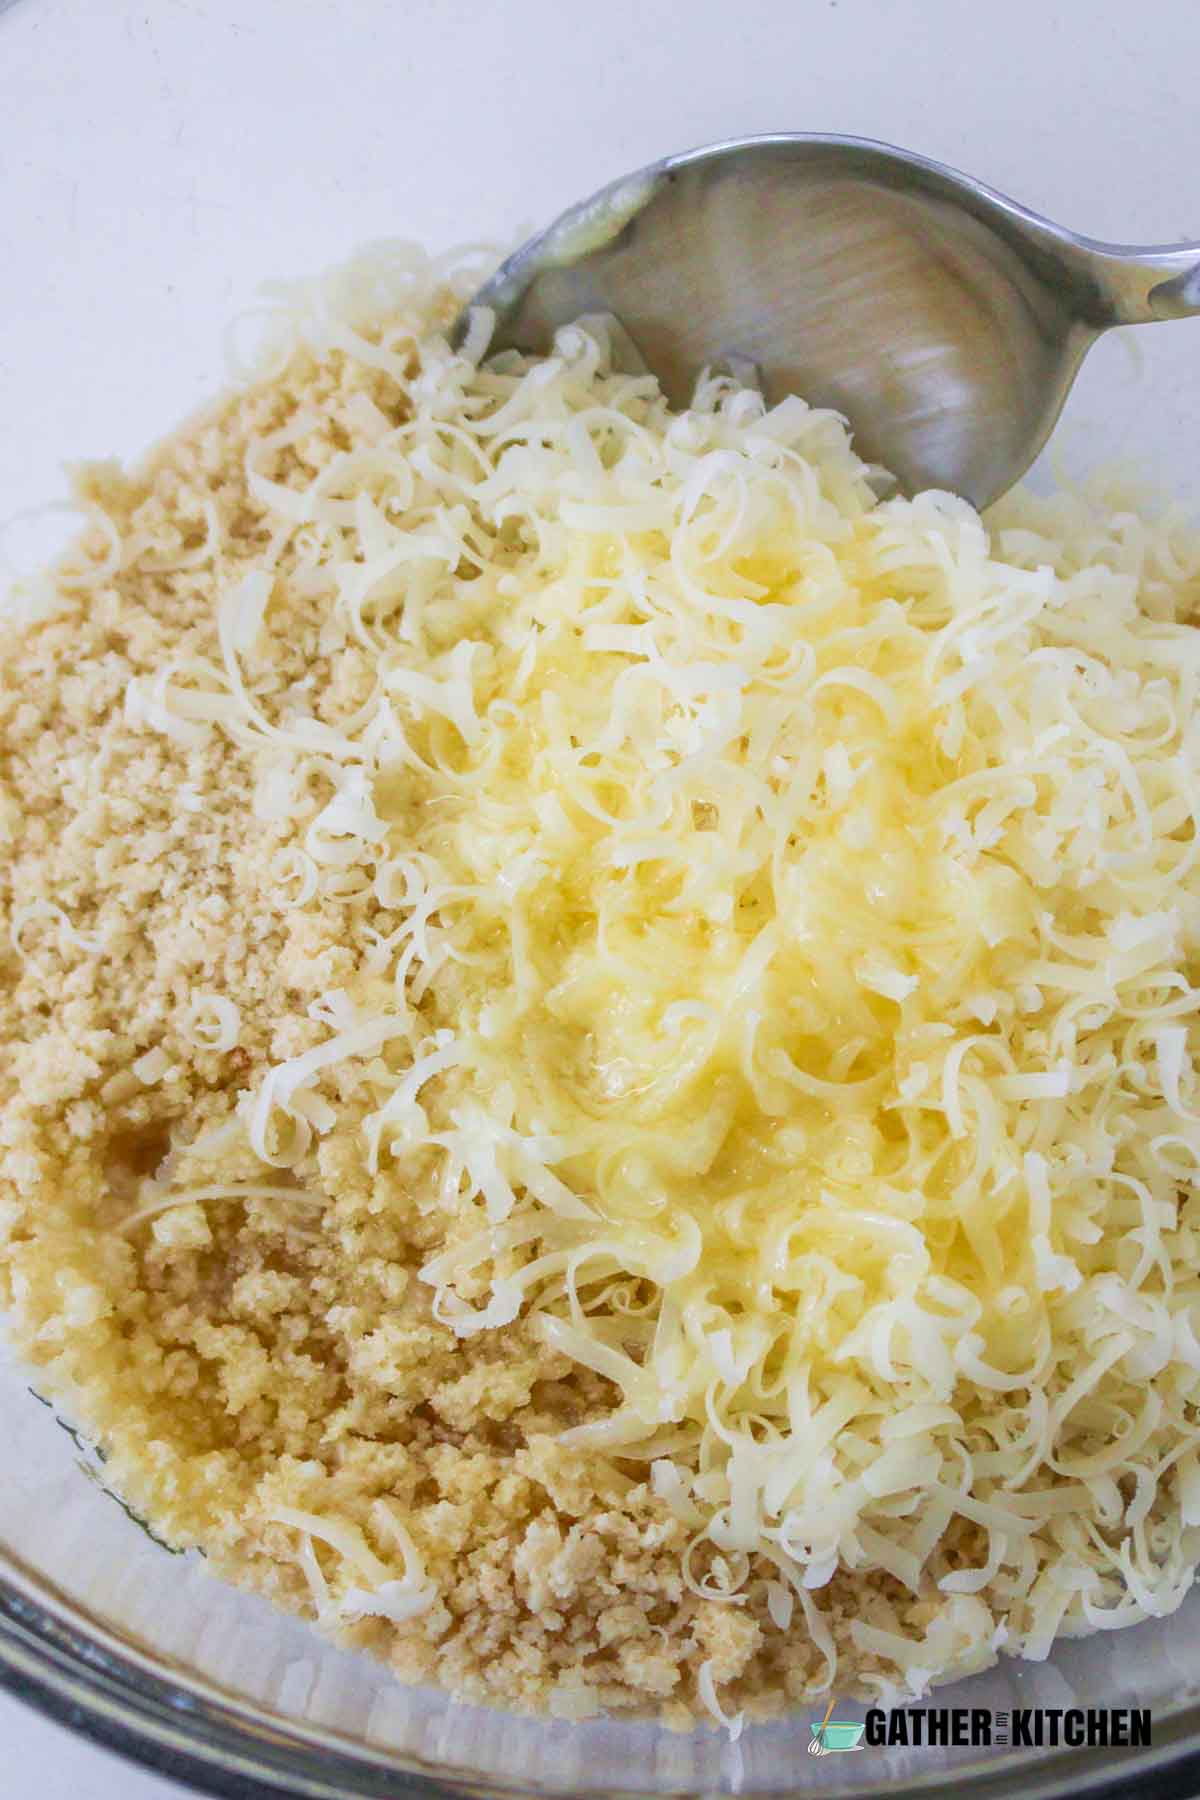 Breadcrumbs, Parmesan and melted butter in a bowl.